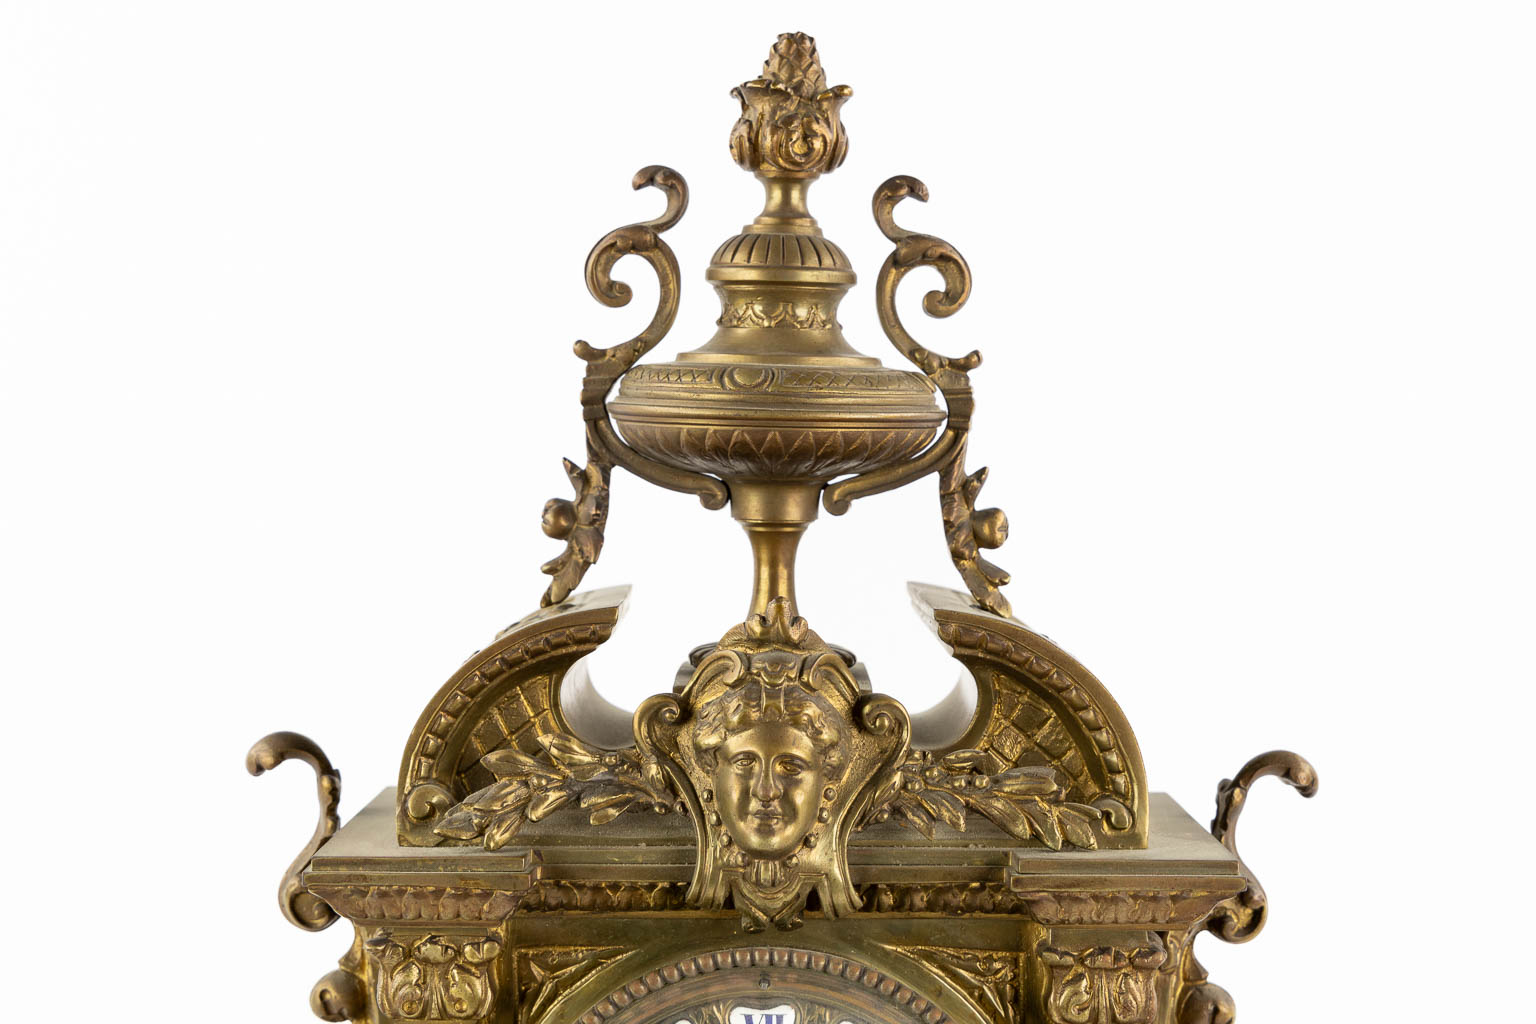 A three-piece mantle garniture clock and candelabra, patinated bronze. (L:16 x W:33 x H:50 cm) - Image 11 of 13